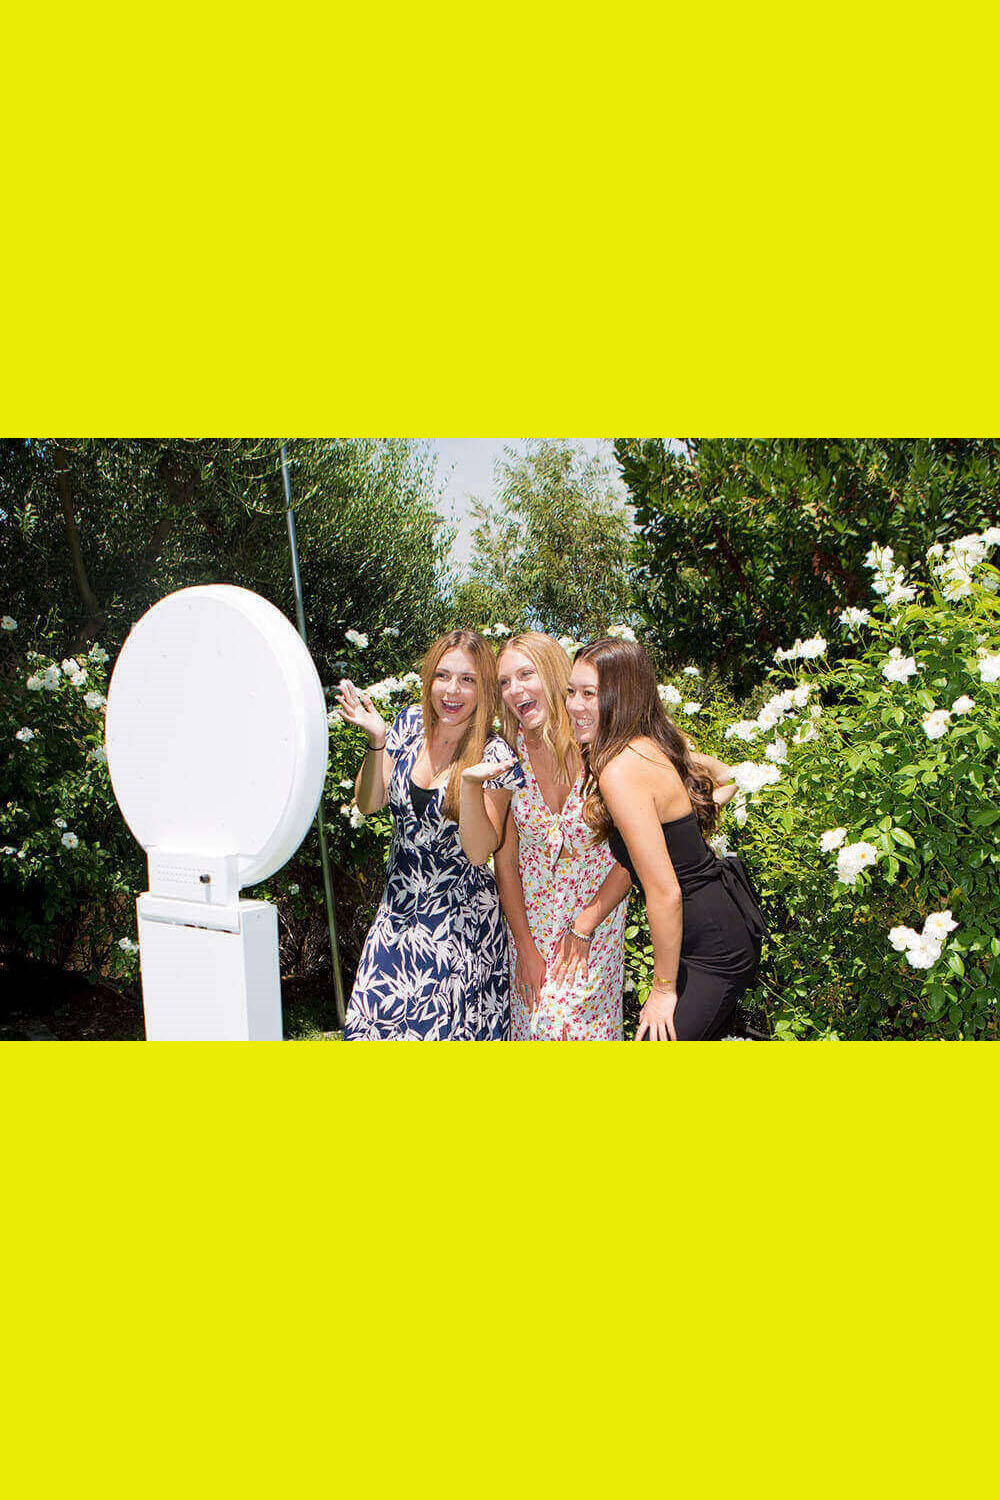 Three girls know how to have fun with this Los Angeles selfie station.